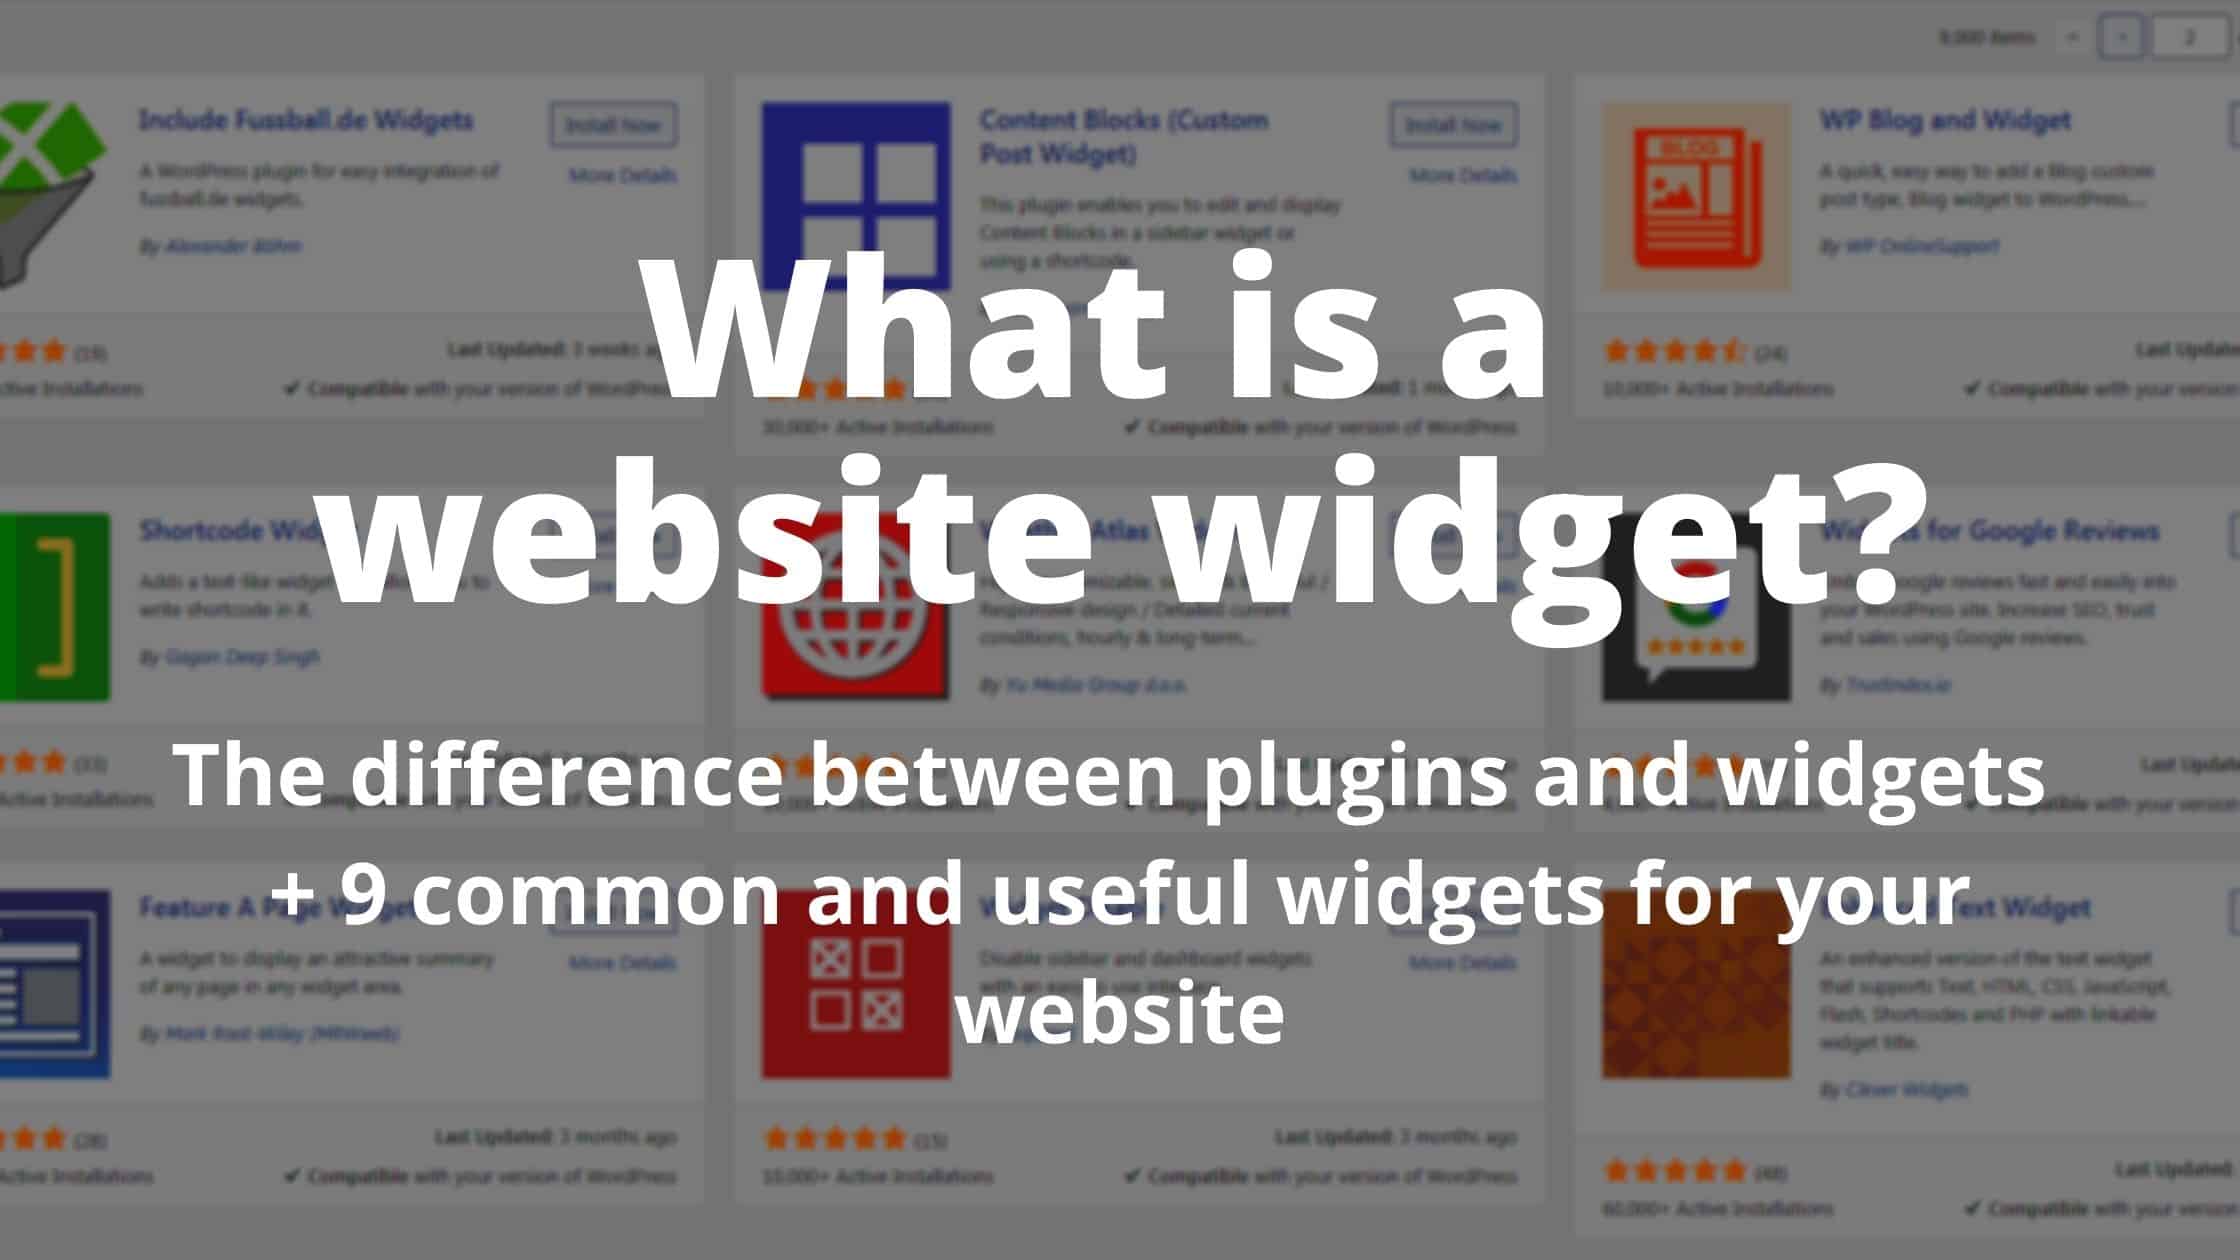 What is an example of a website widget?